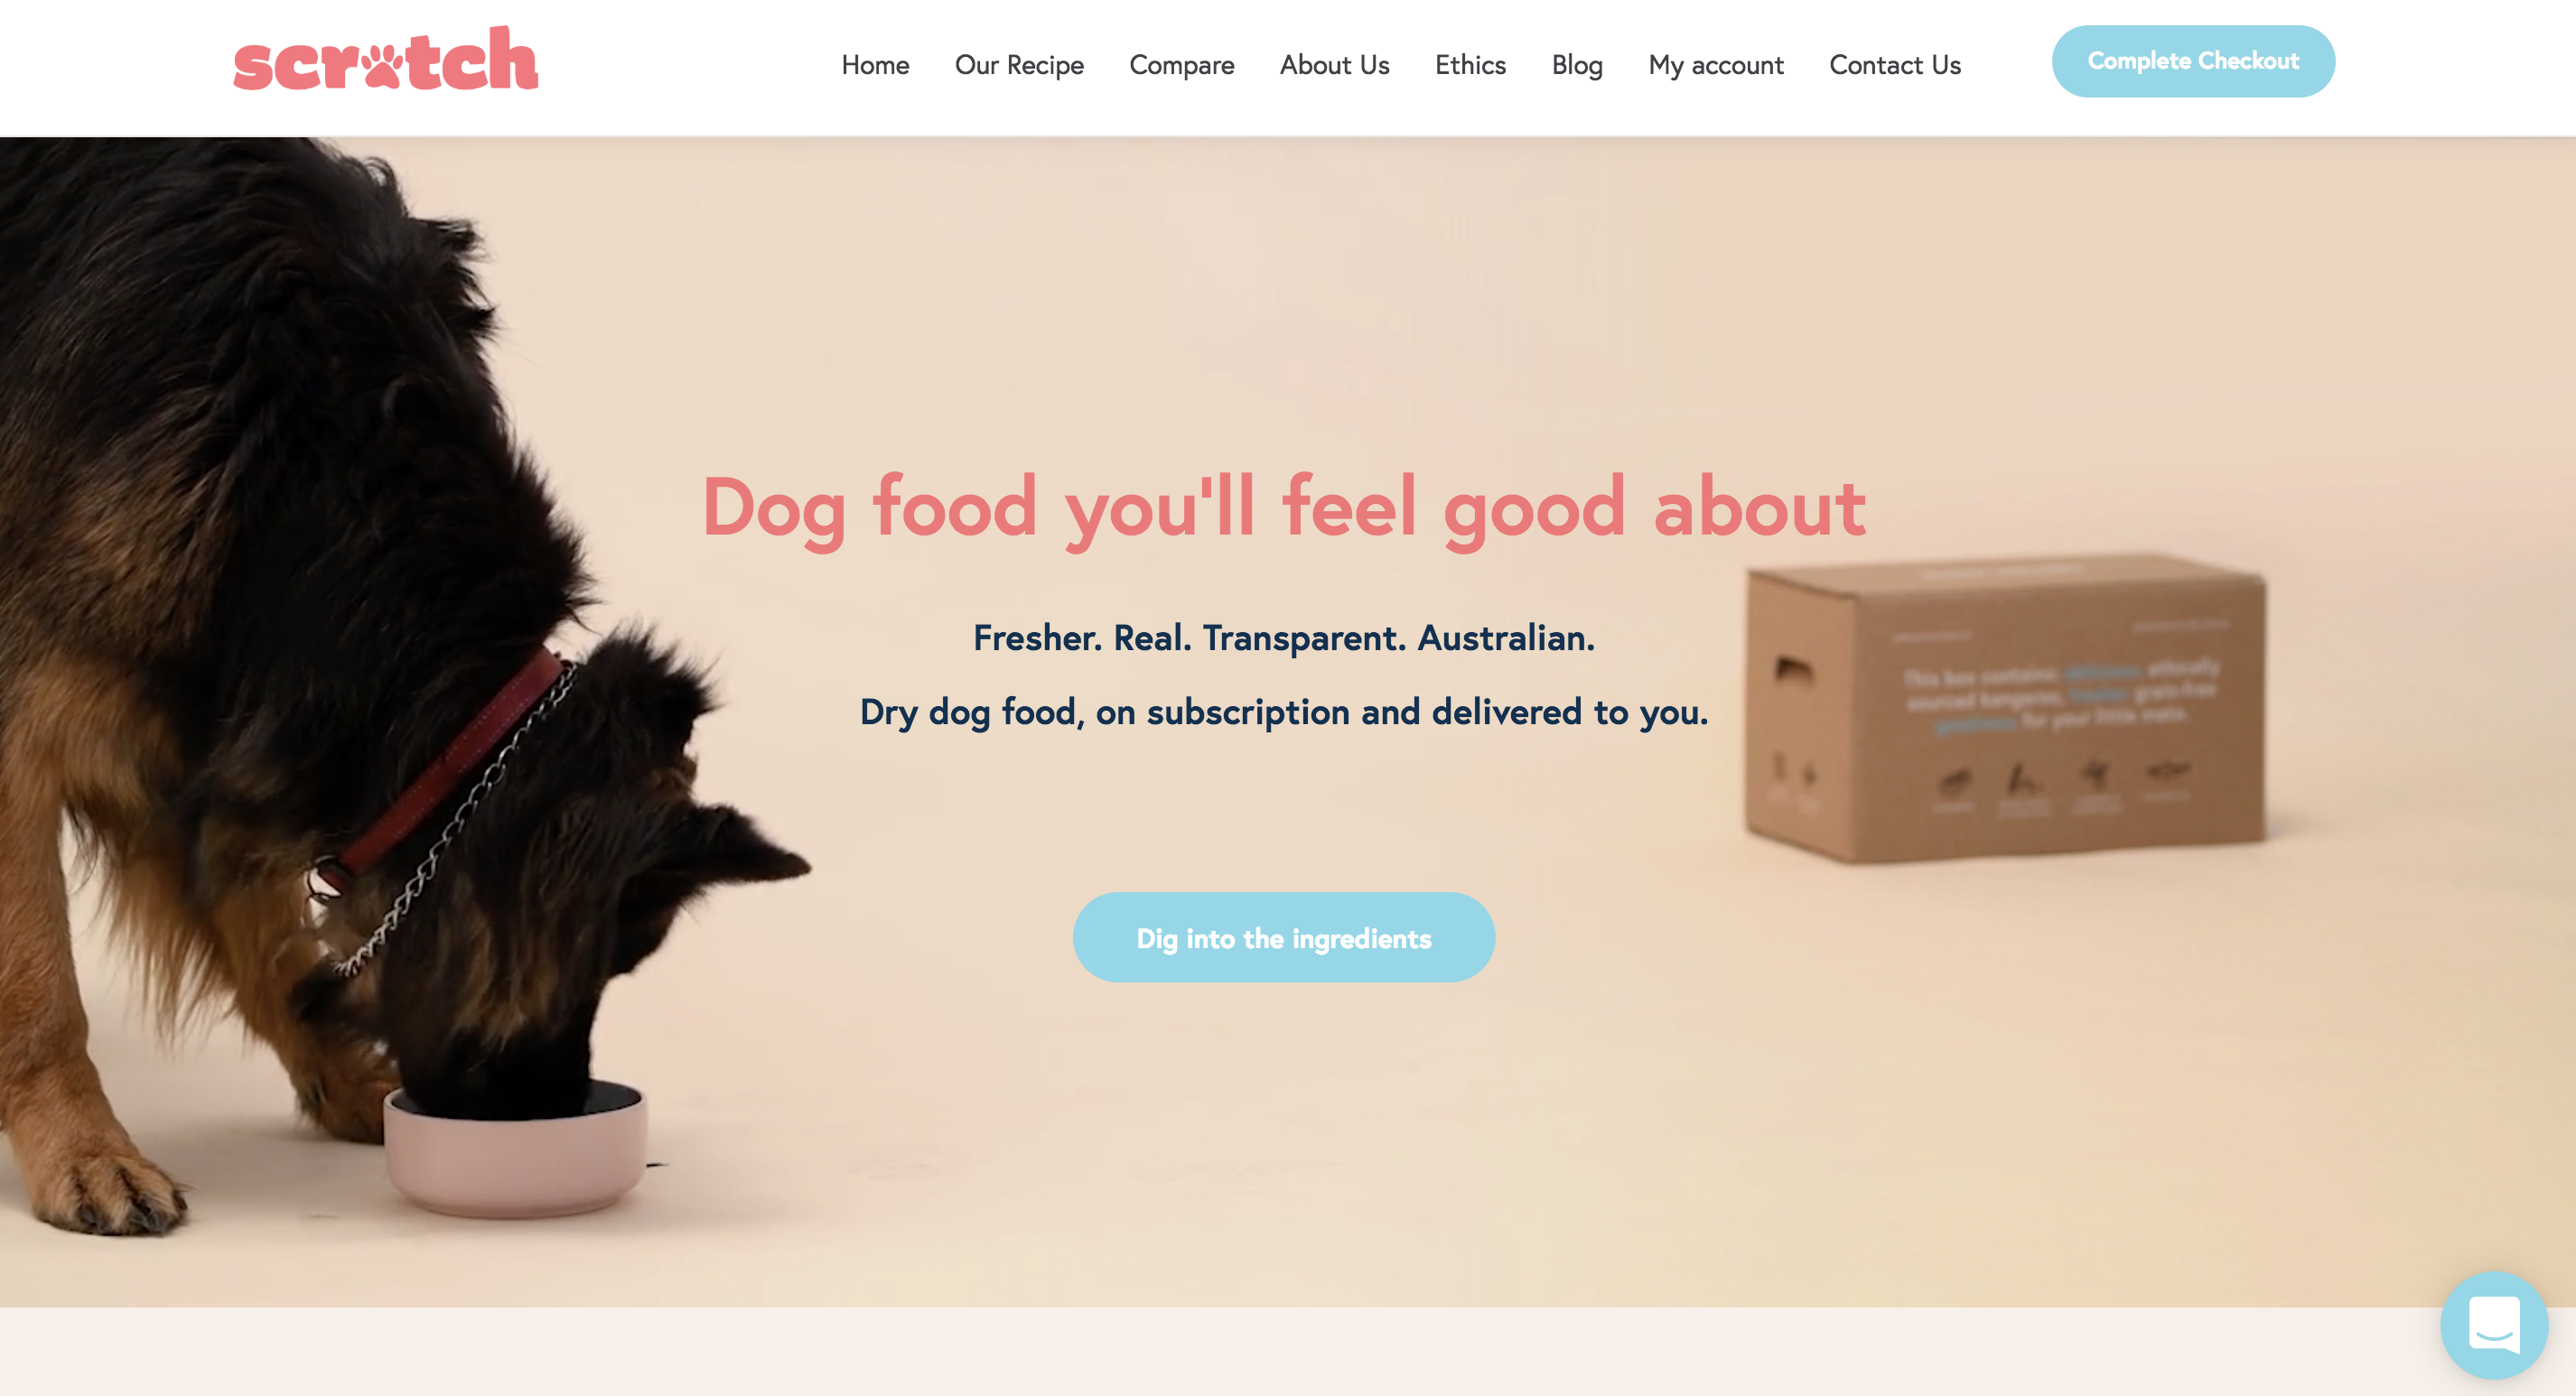 Scratch Pet Food's home page